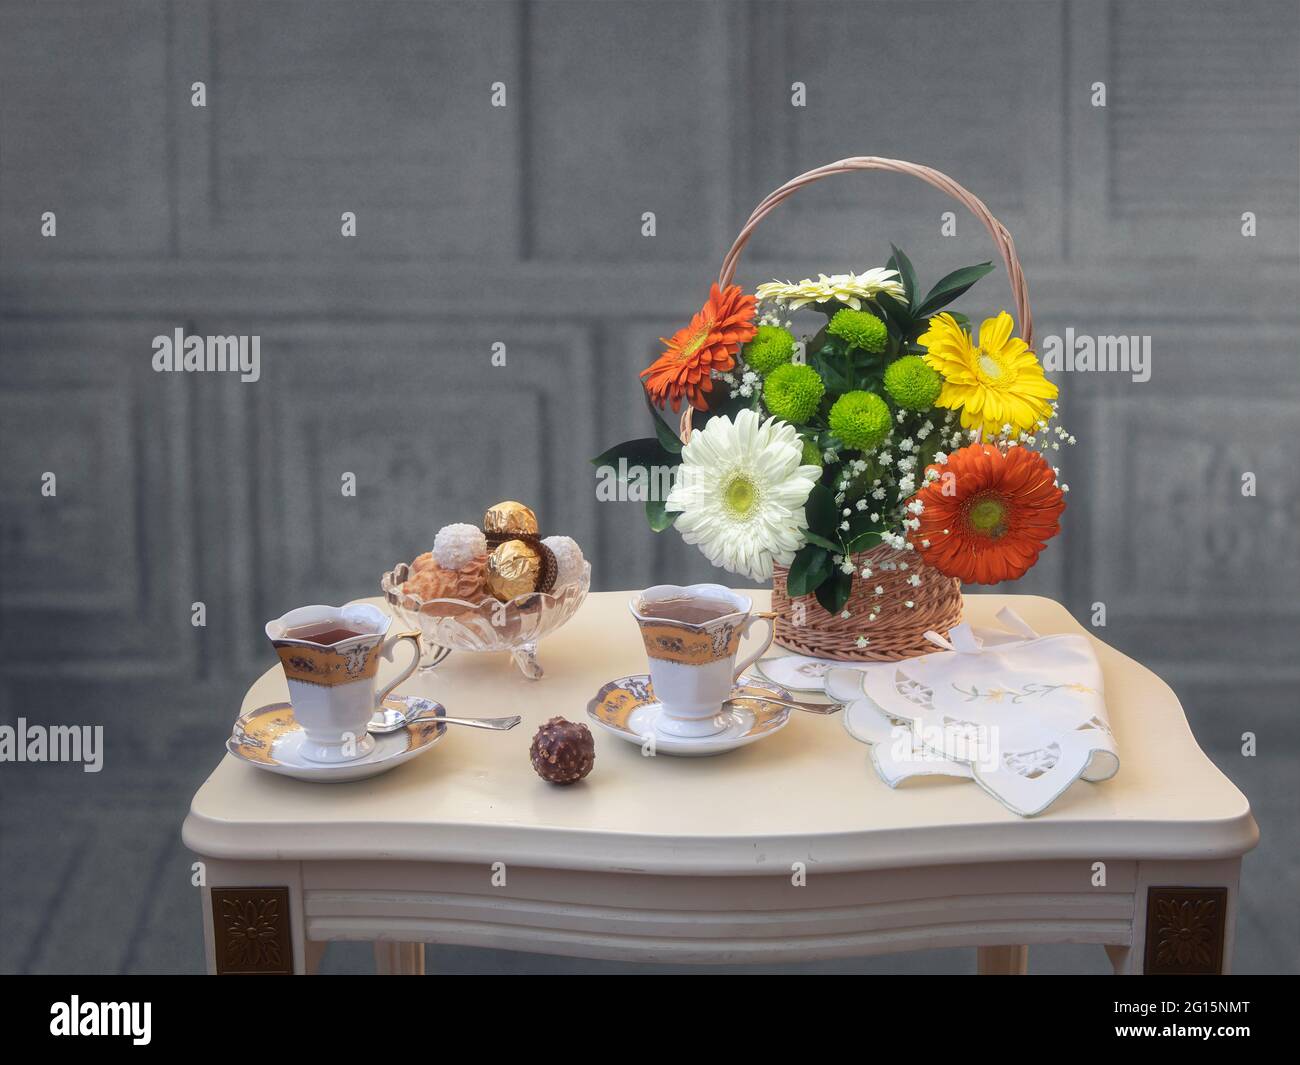 Still life with bouquet flowers on a tea table Stock Photo